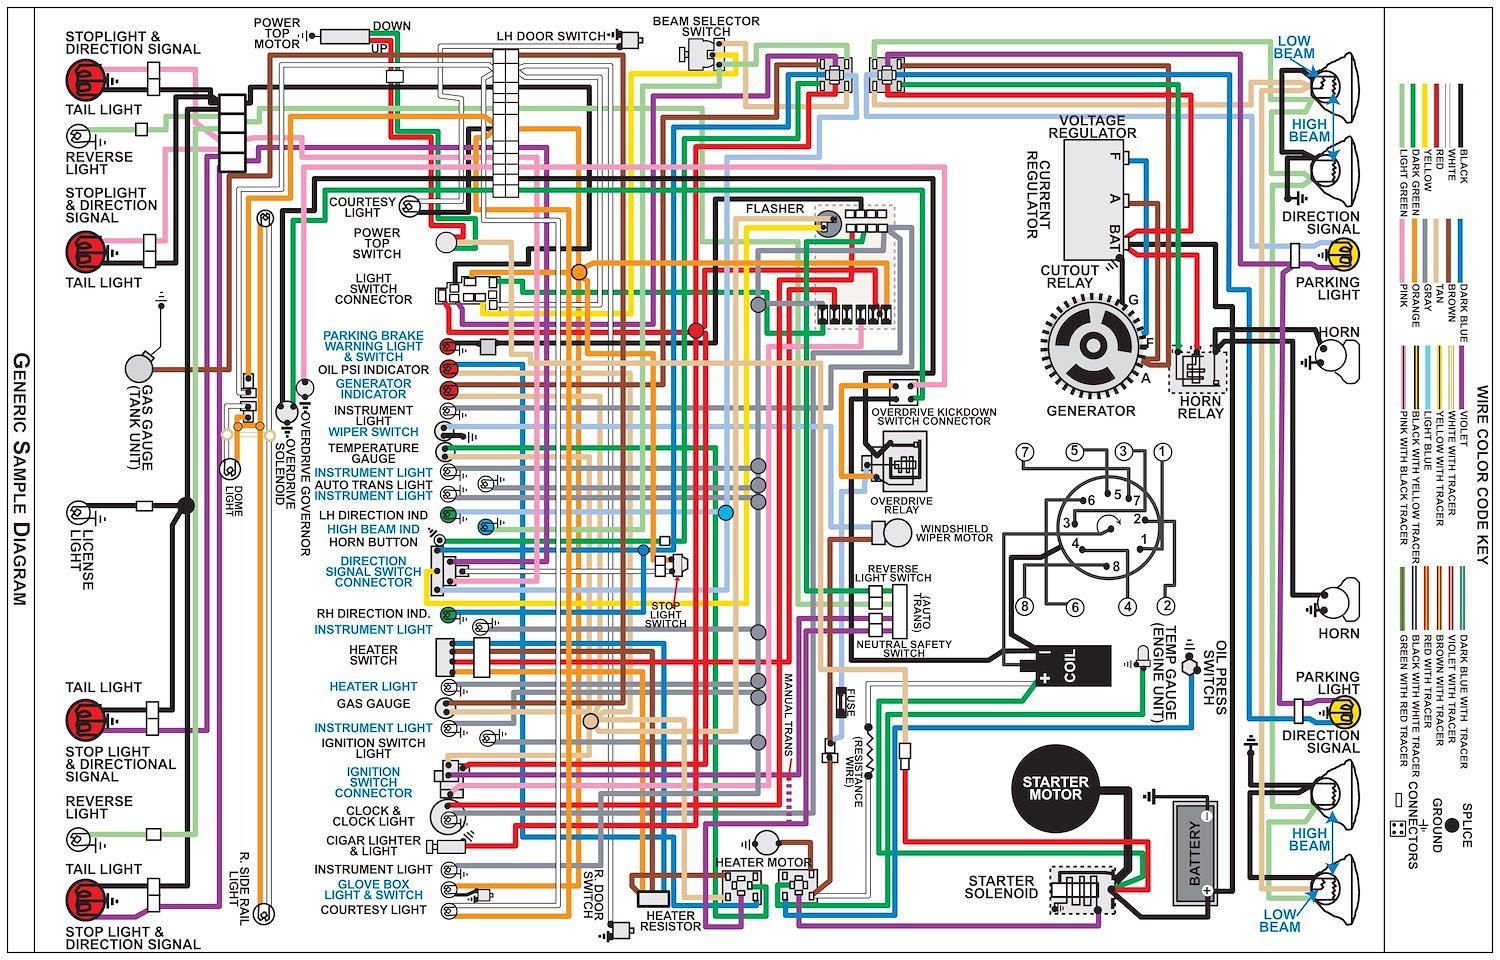 Wiring Diagram for 1968-1970 Dodge A100, A108 Van/Pickup, 11 in x 17 in., Laminated